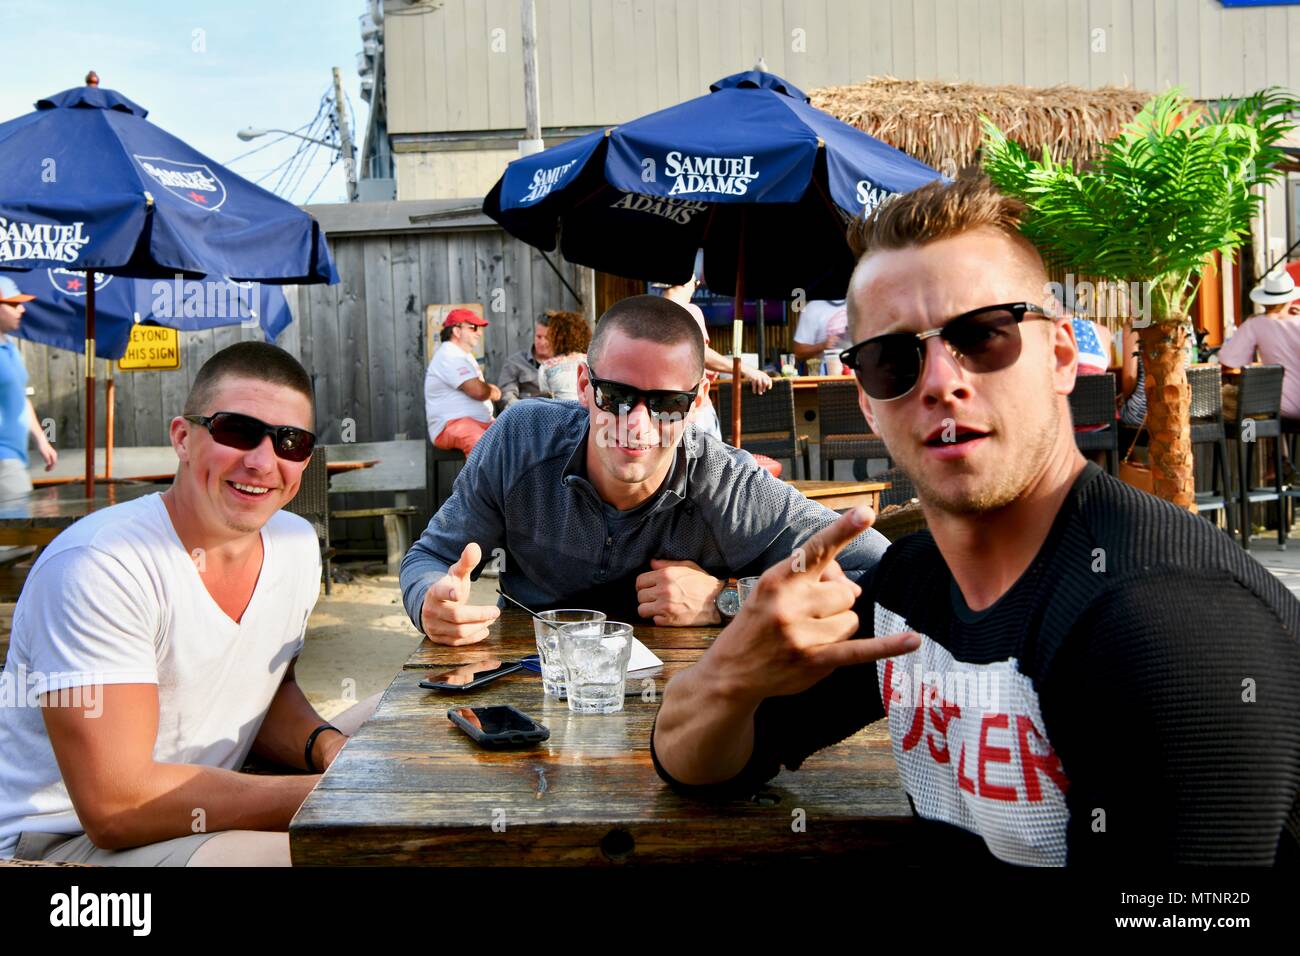 Three men aged 21-30 having some beers at a restaurant with outdoor dining Stock Photo